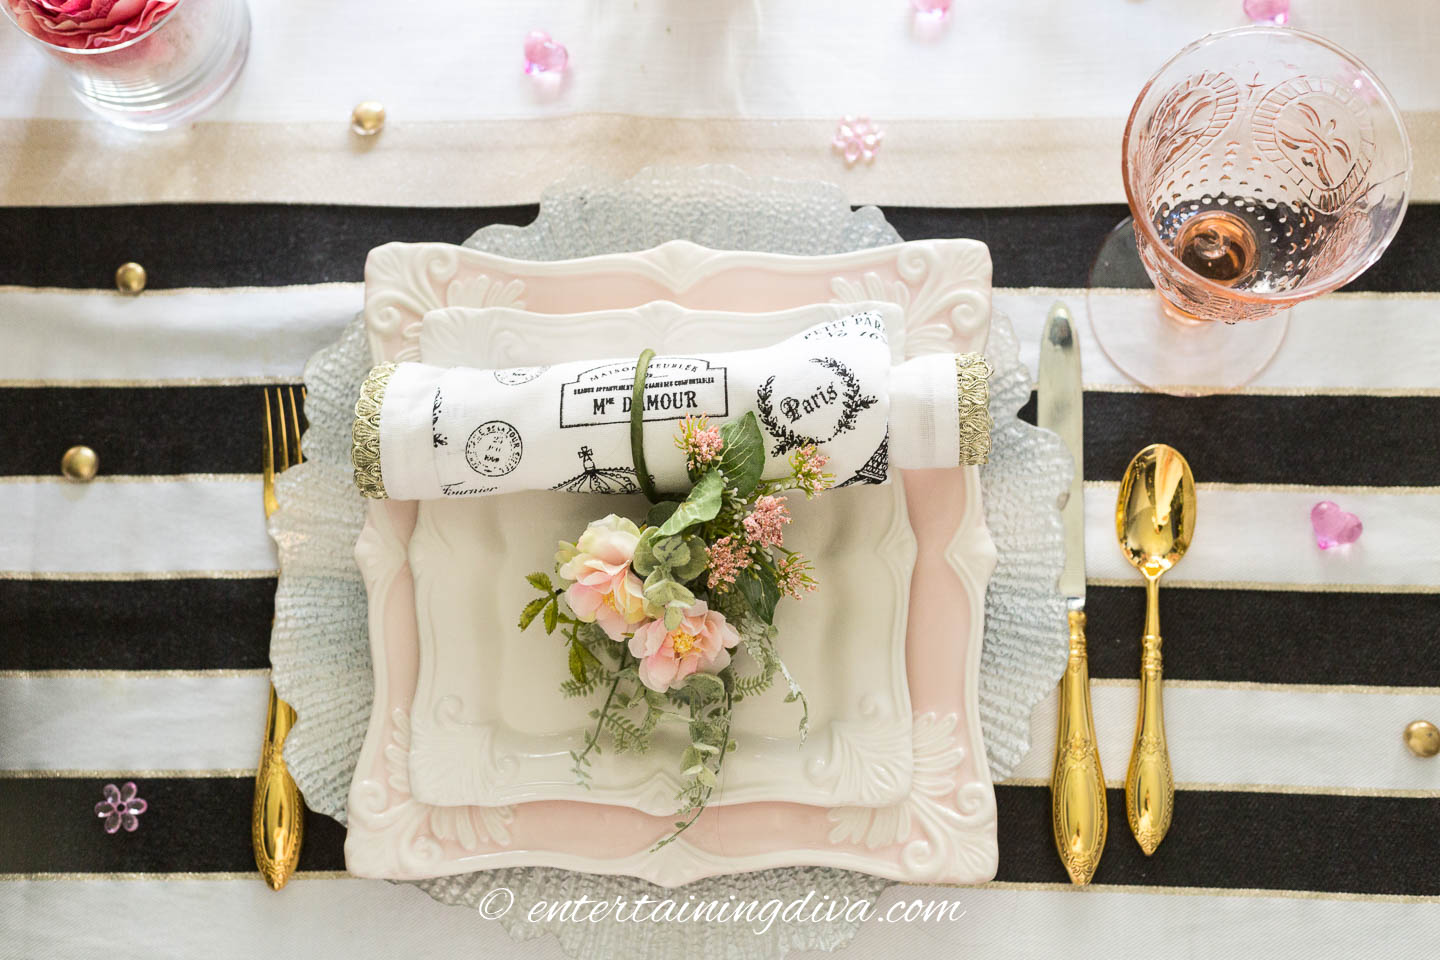 Blush pink place setting with gold cutlery and pink wine glass